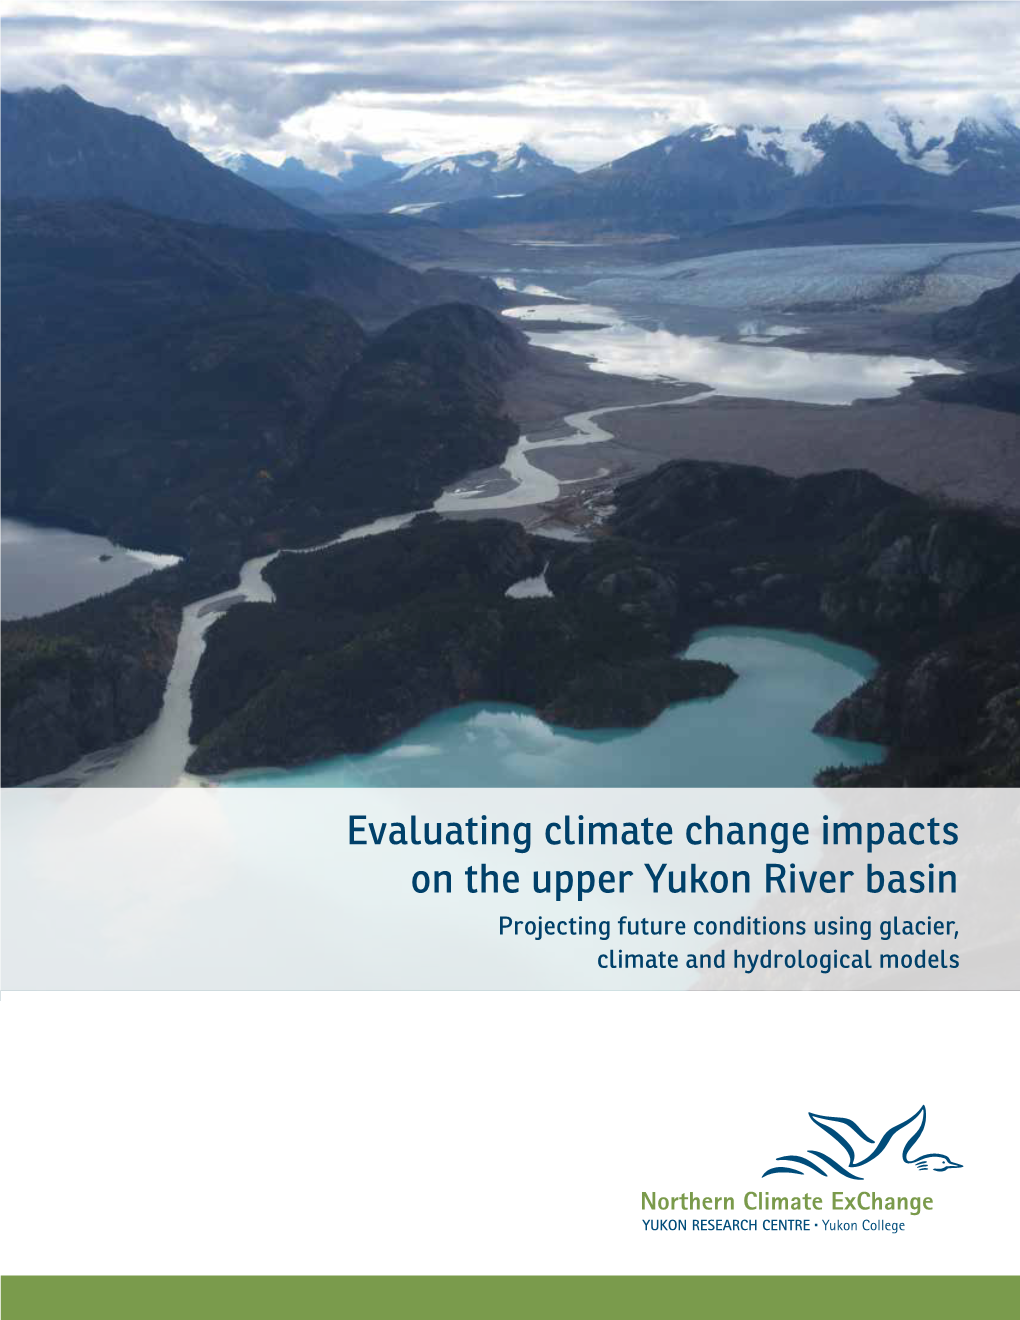 Evaluating Climate Change Impacts on the Upper Yukon River Basin